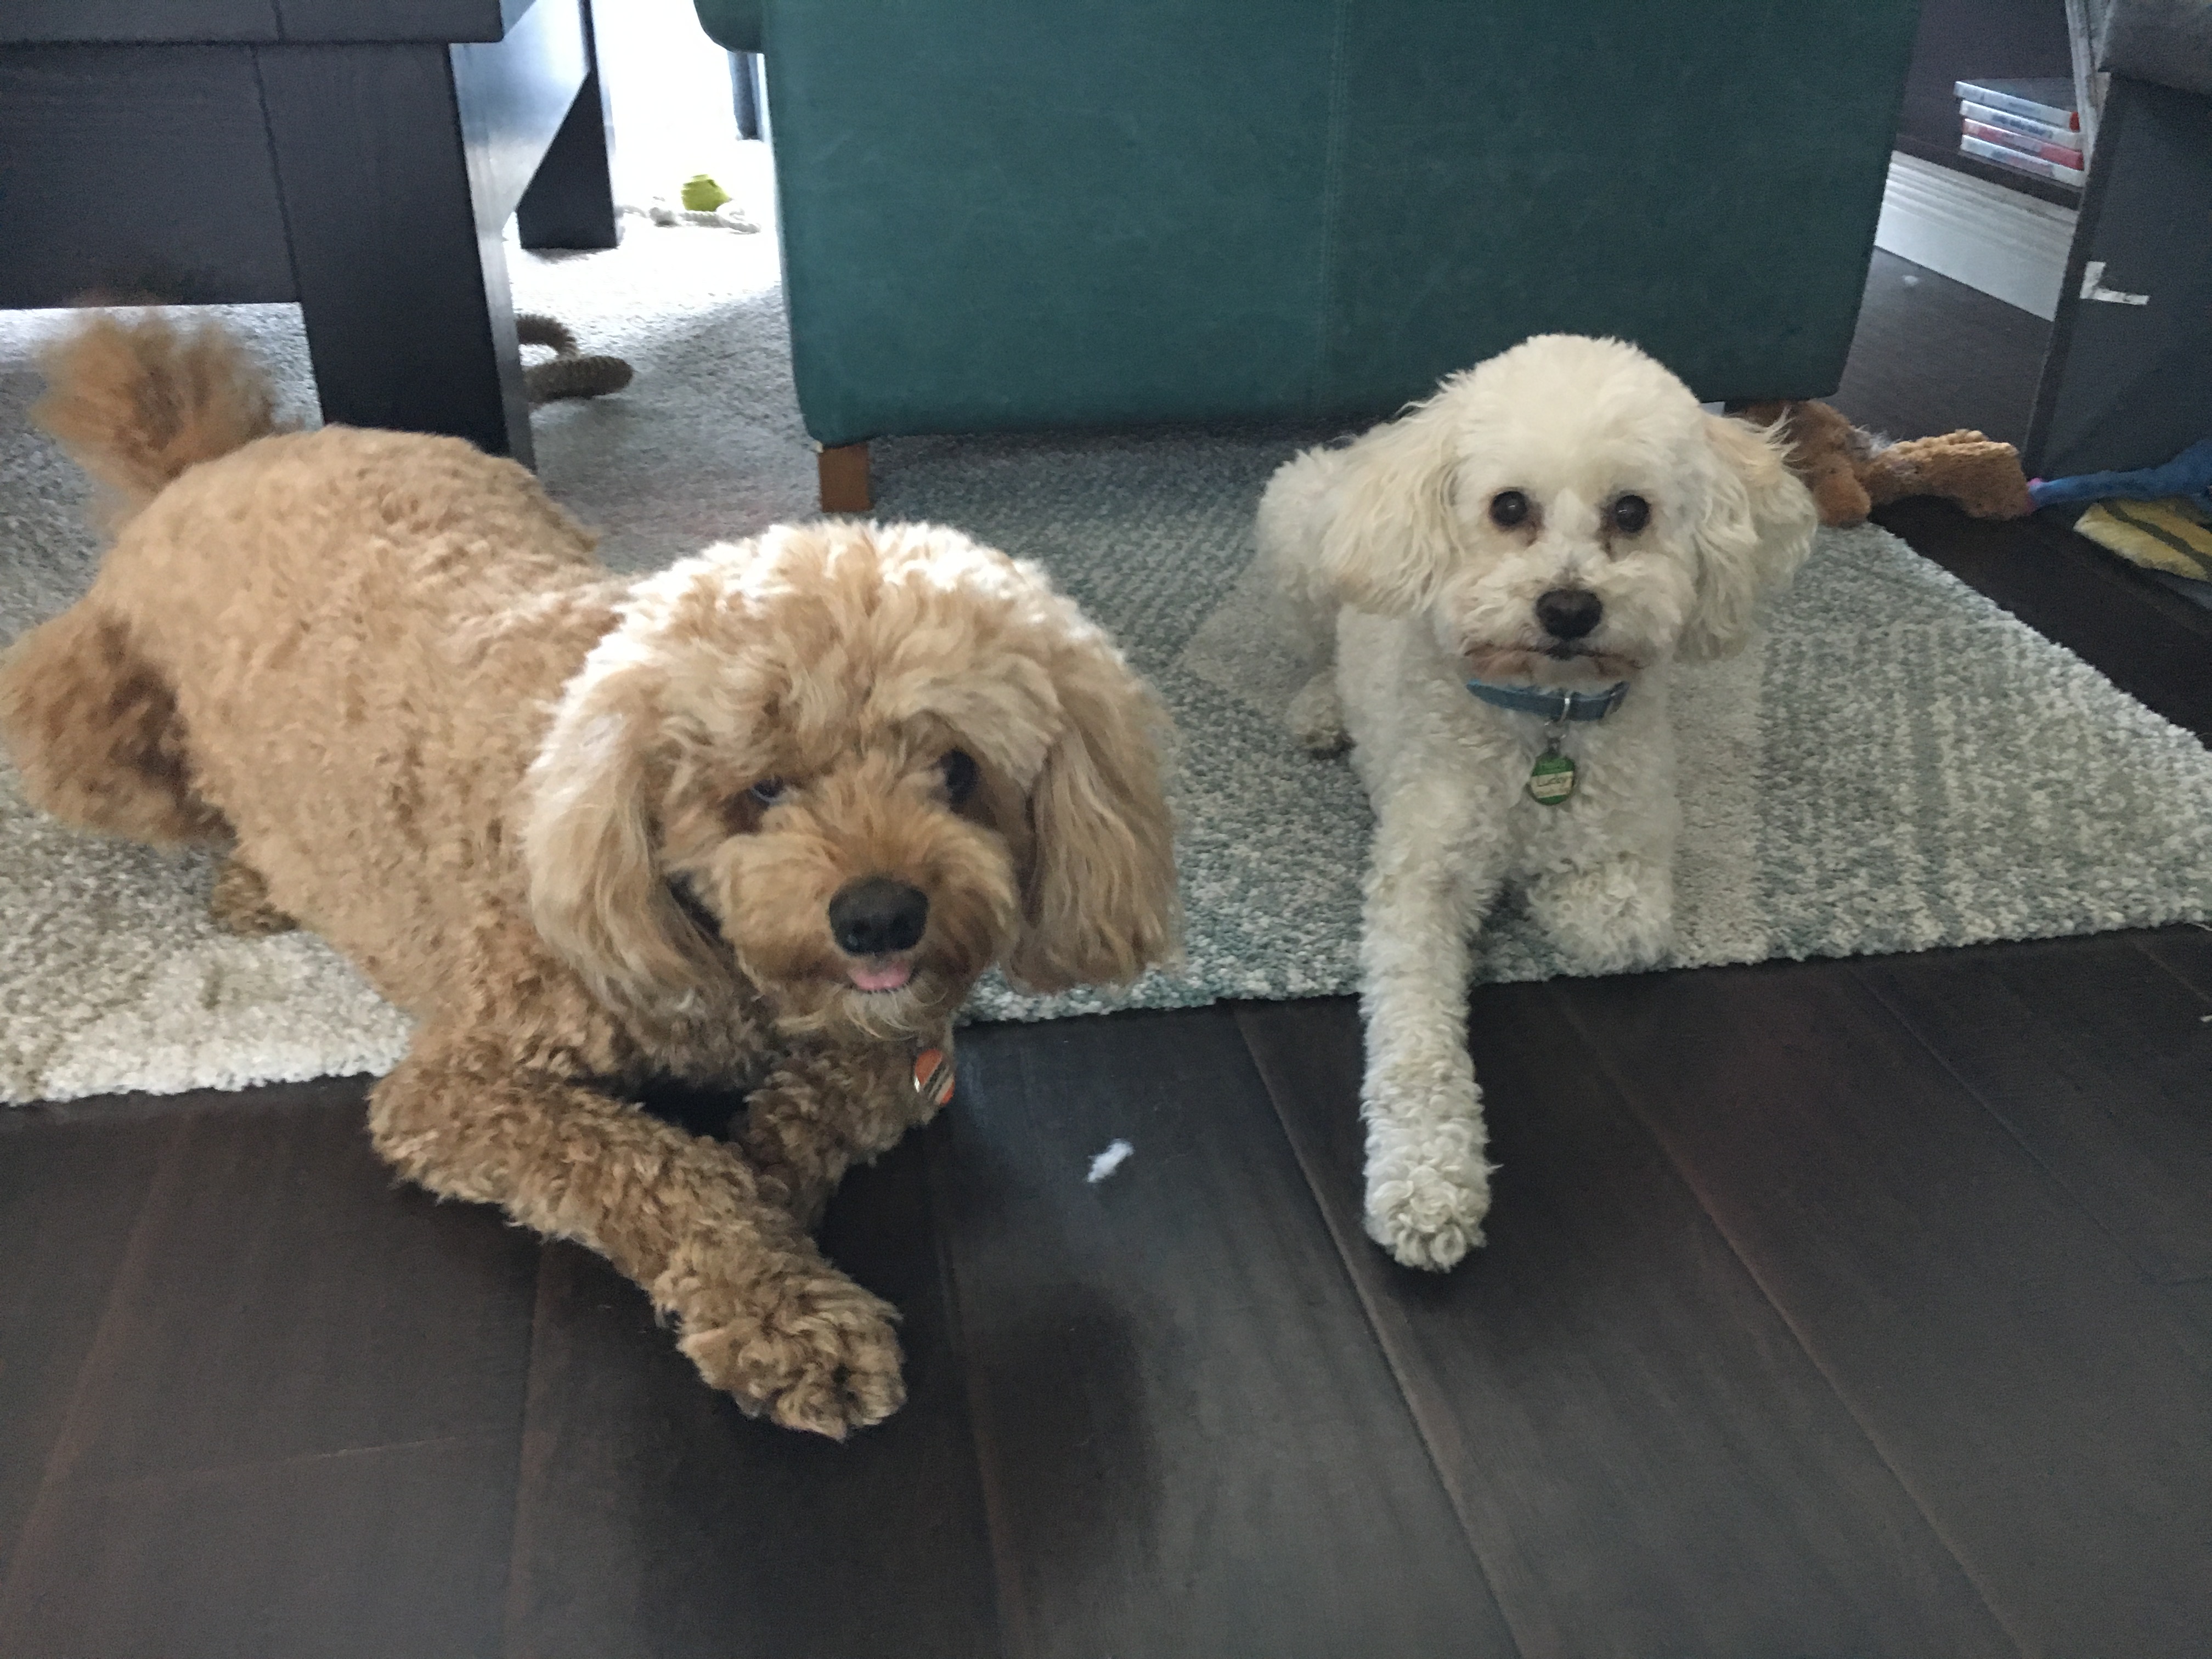 Cooper and Lucky - Teaching a Dog to Trust His Guardian's Leadership to Stop His Chewing and Separation Anxiety